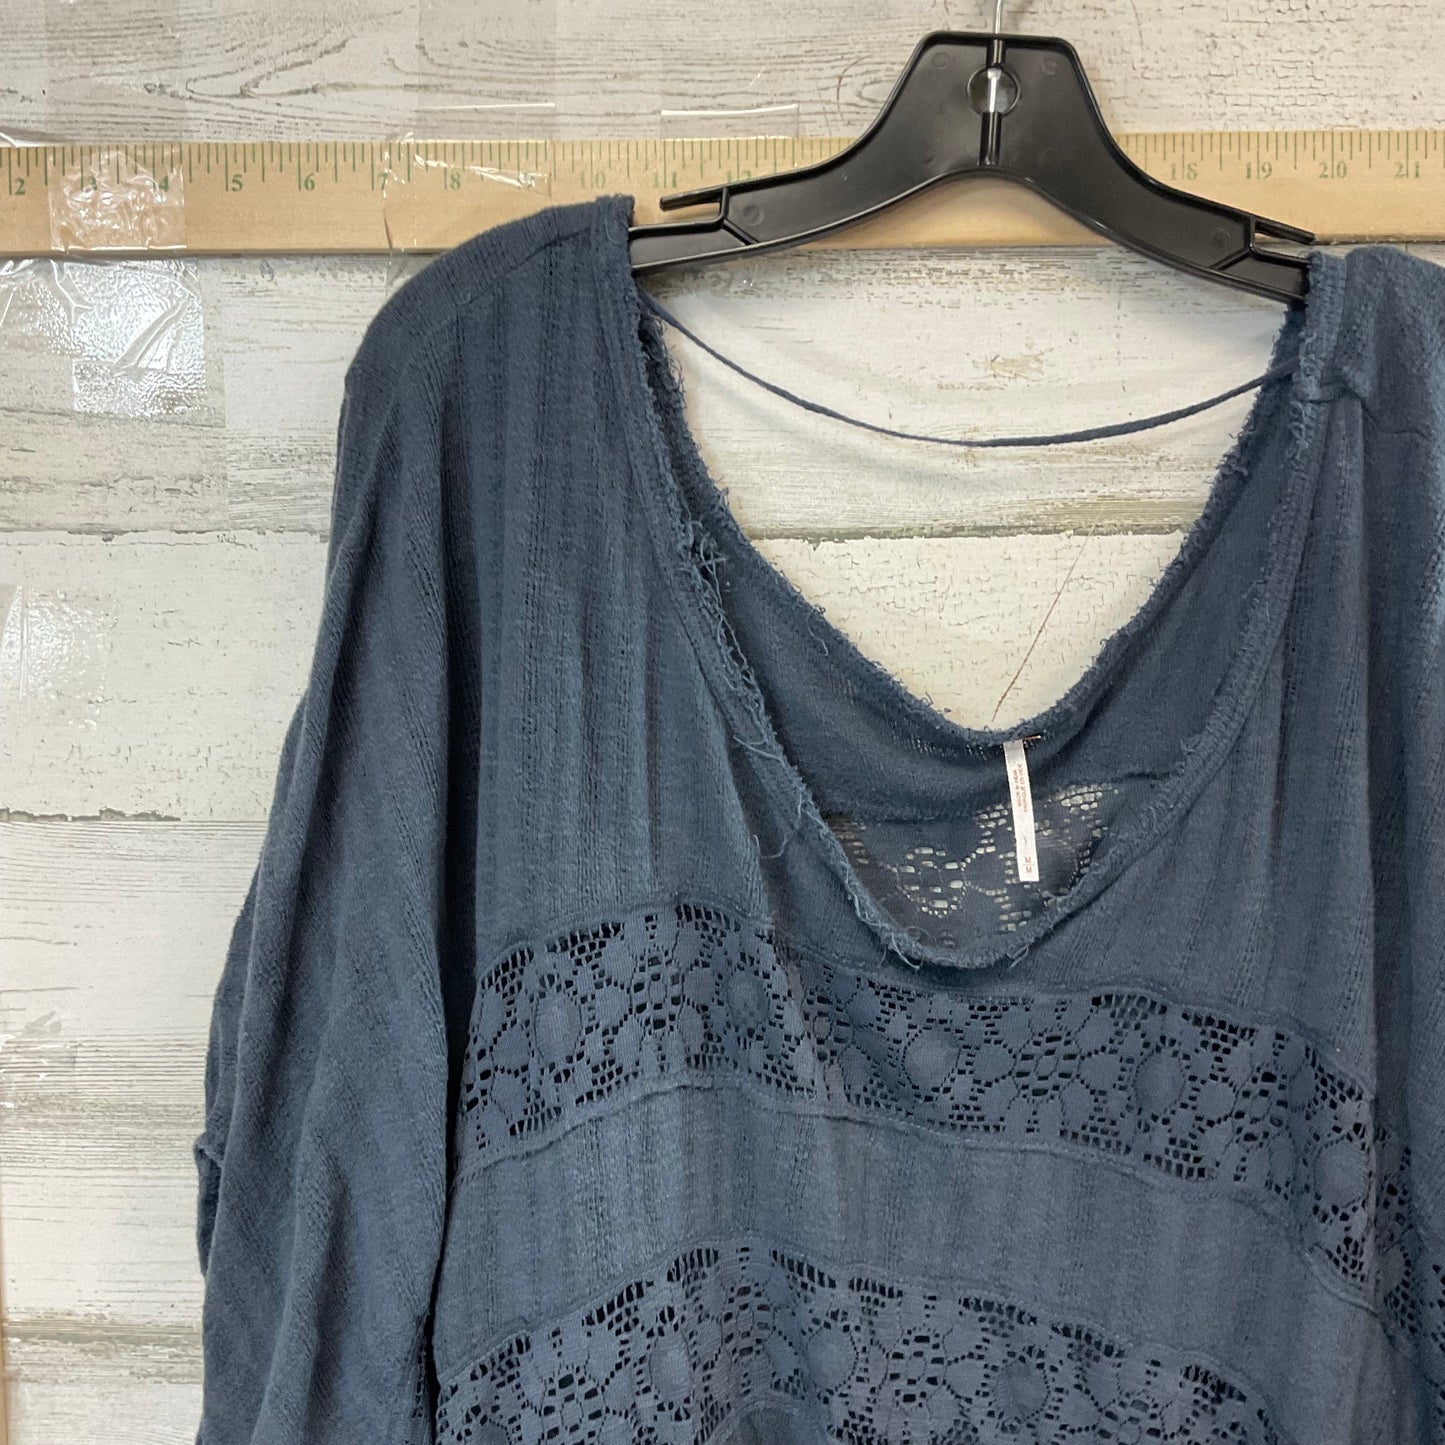 Grey Top Short Sleeve Free People, Size M